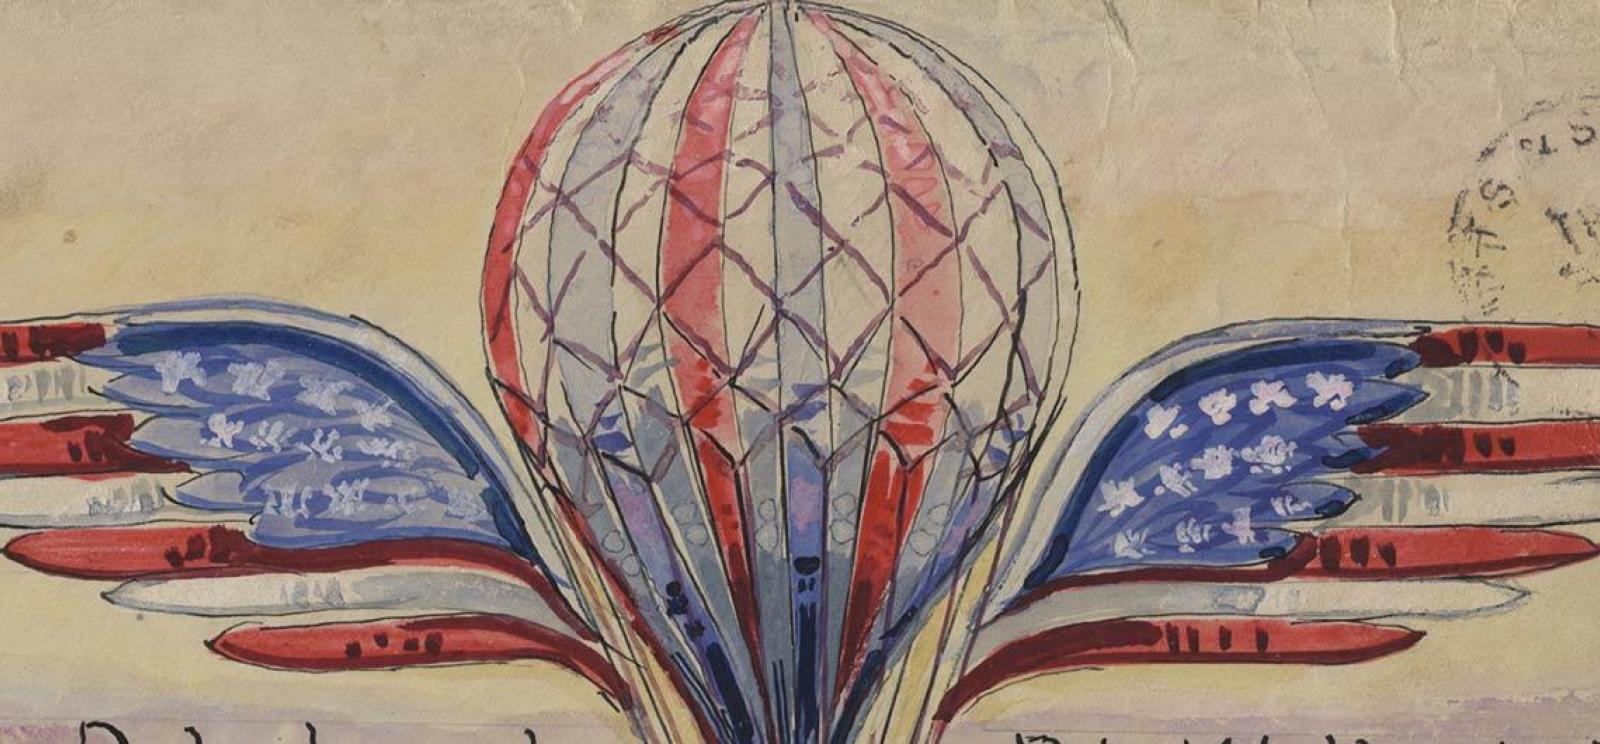 Painting of a hot air balloon in red, white and blue